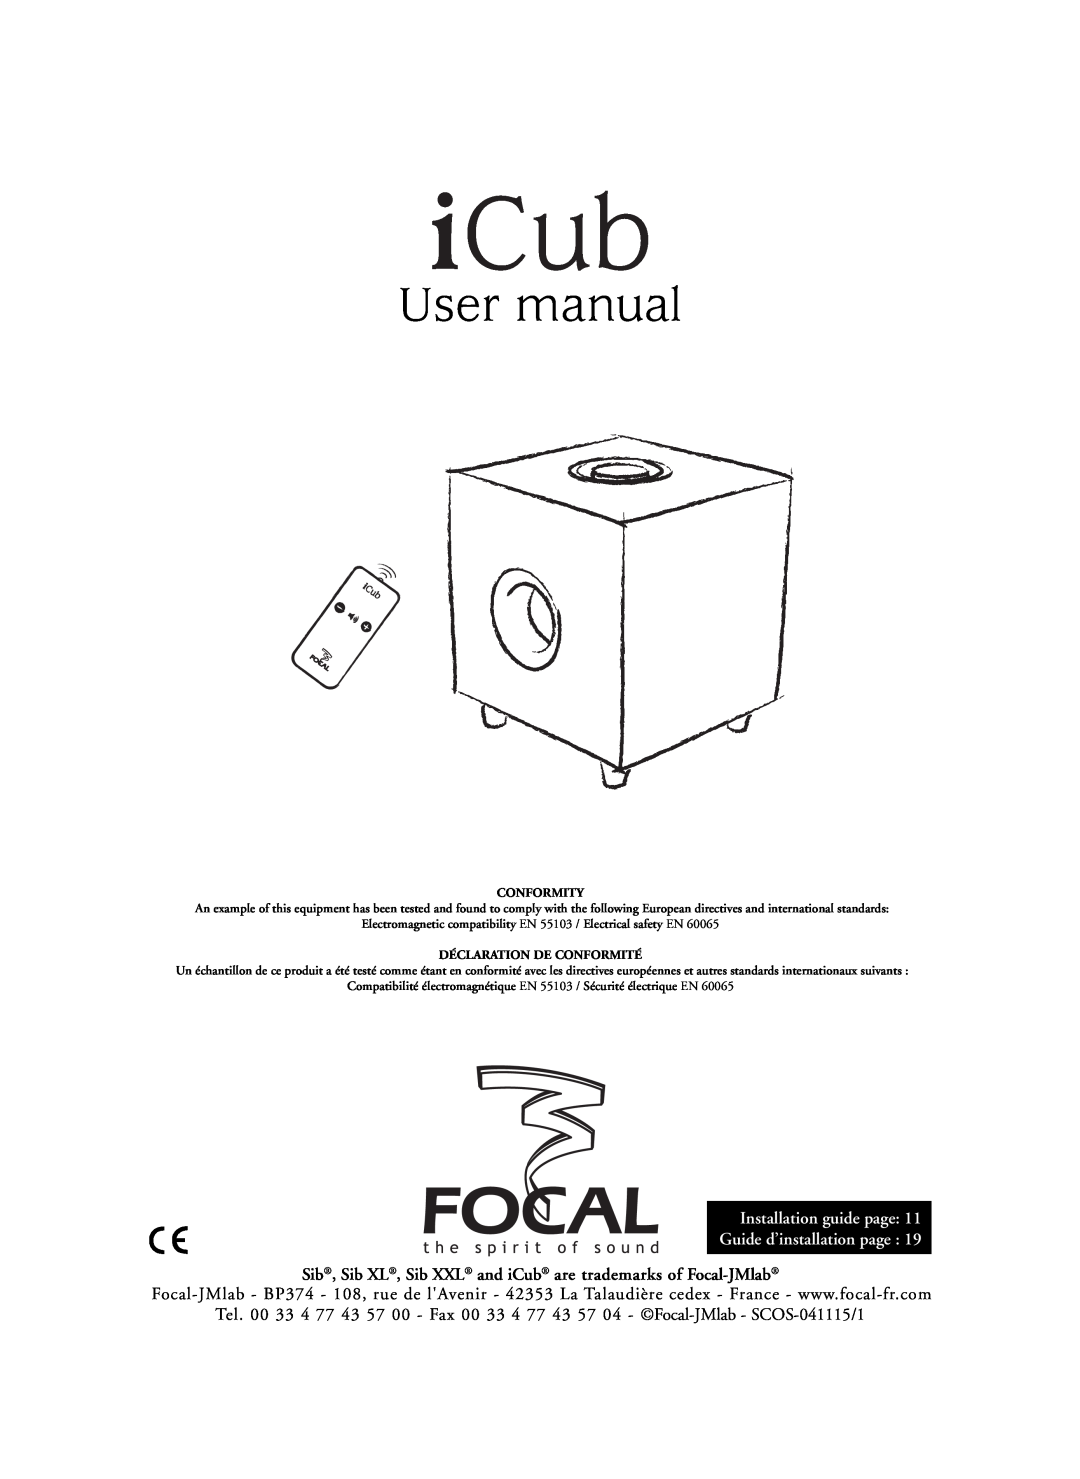 Focal SIB XXL, Sib XL user manual Installation guide page, Guide d’installation page 